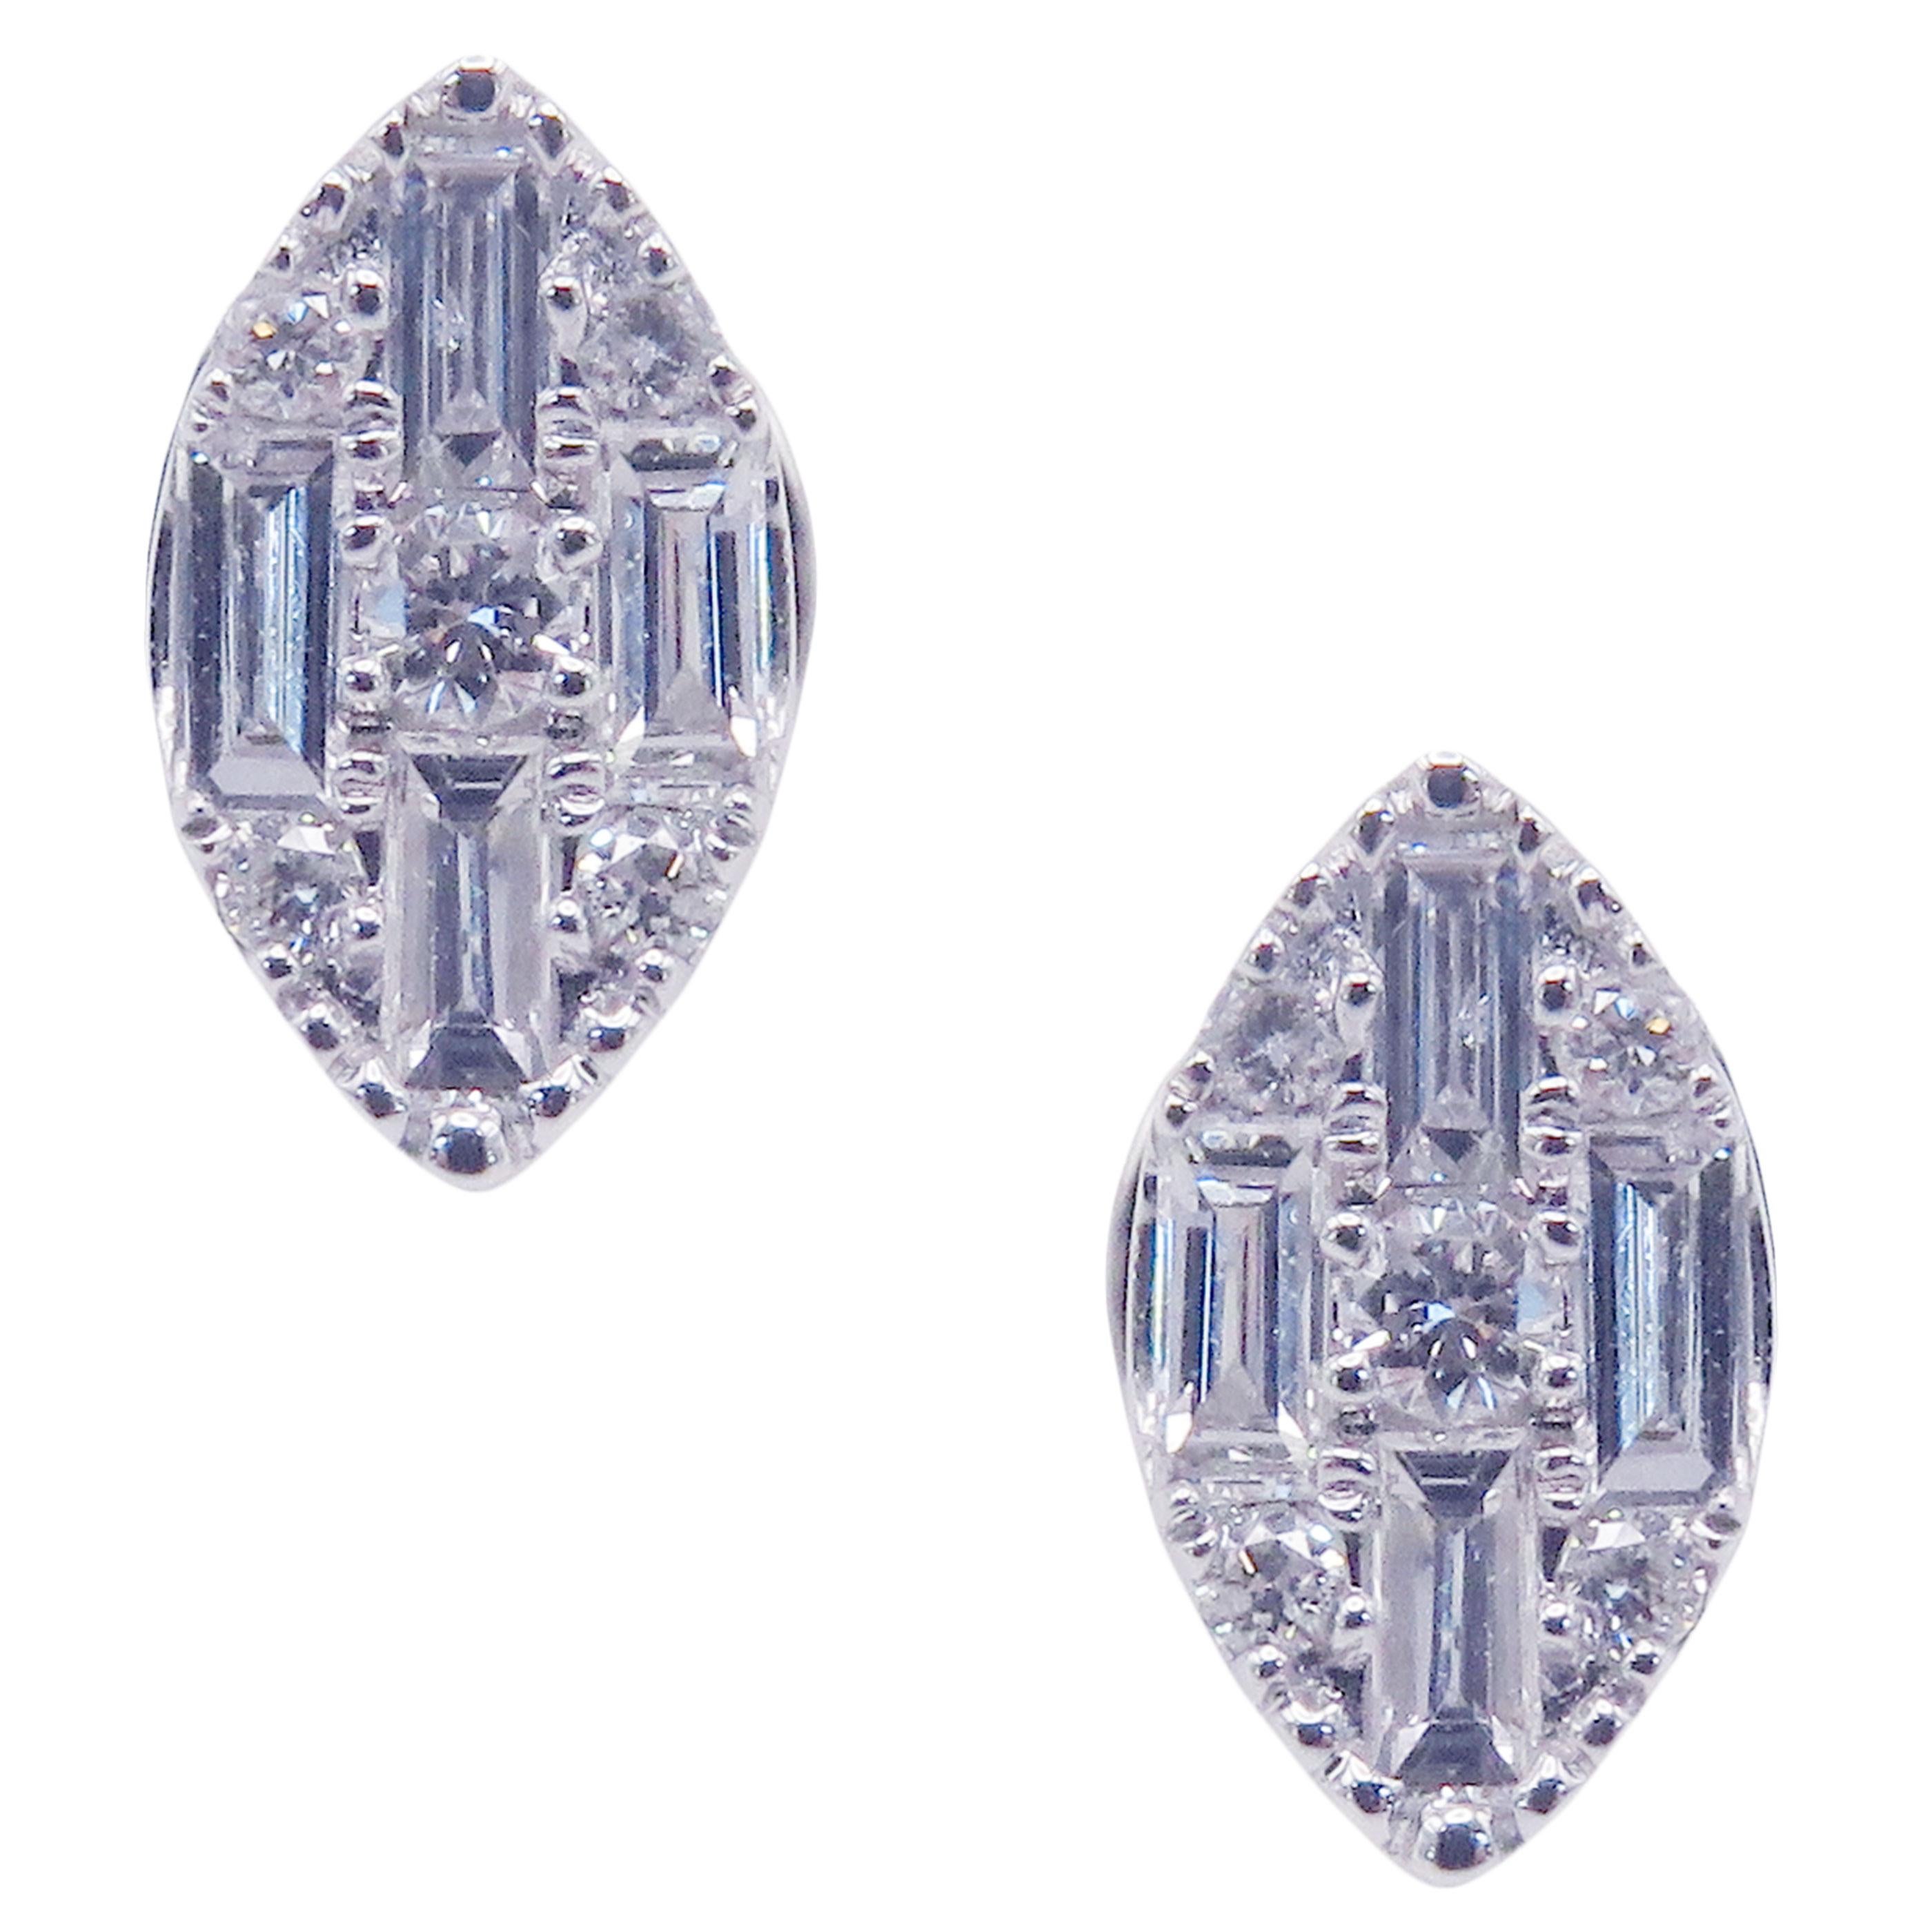 This round and baguette combination diamond illusion marquise-shape stud earring is crafted in 14-karat white gold, featuring 10 round white diamonds totaling of 0.08 carats and 8 baguette white diamonds totaling of 0.24 carats.
Approximate total